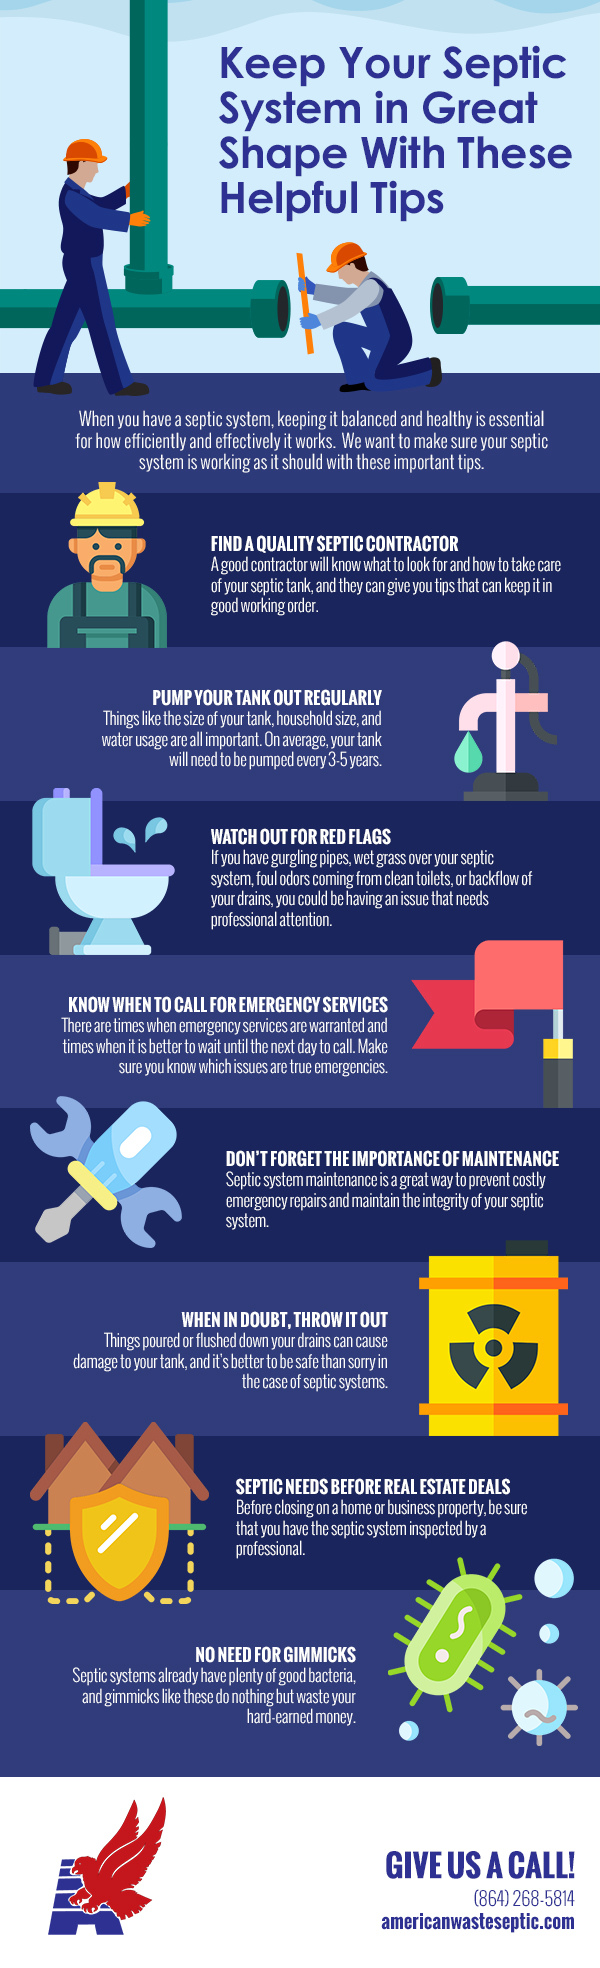 Keep Your Septic System in Great Shape With These Helpful Tips [infographic]